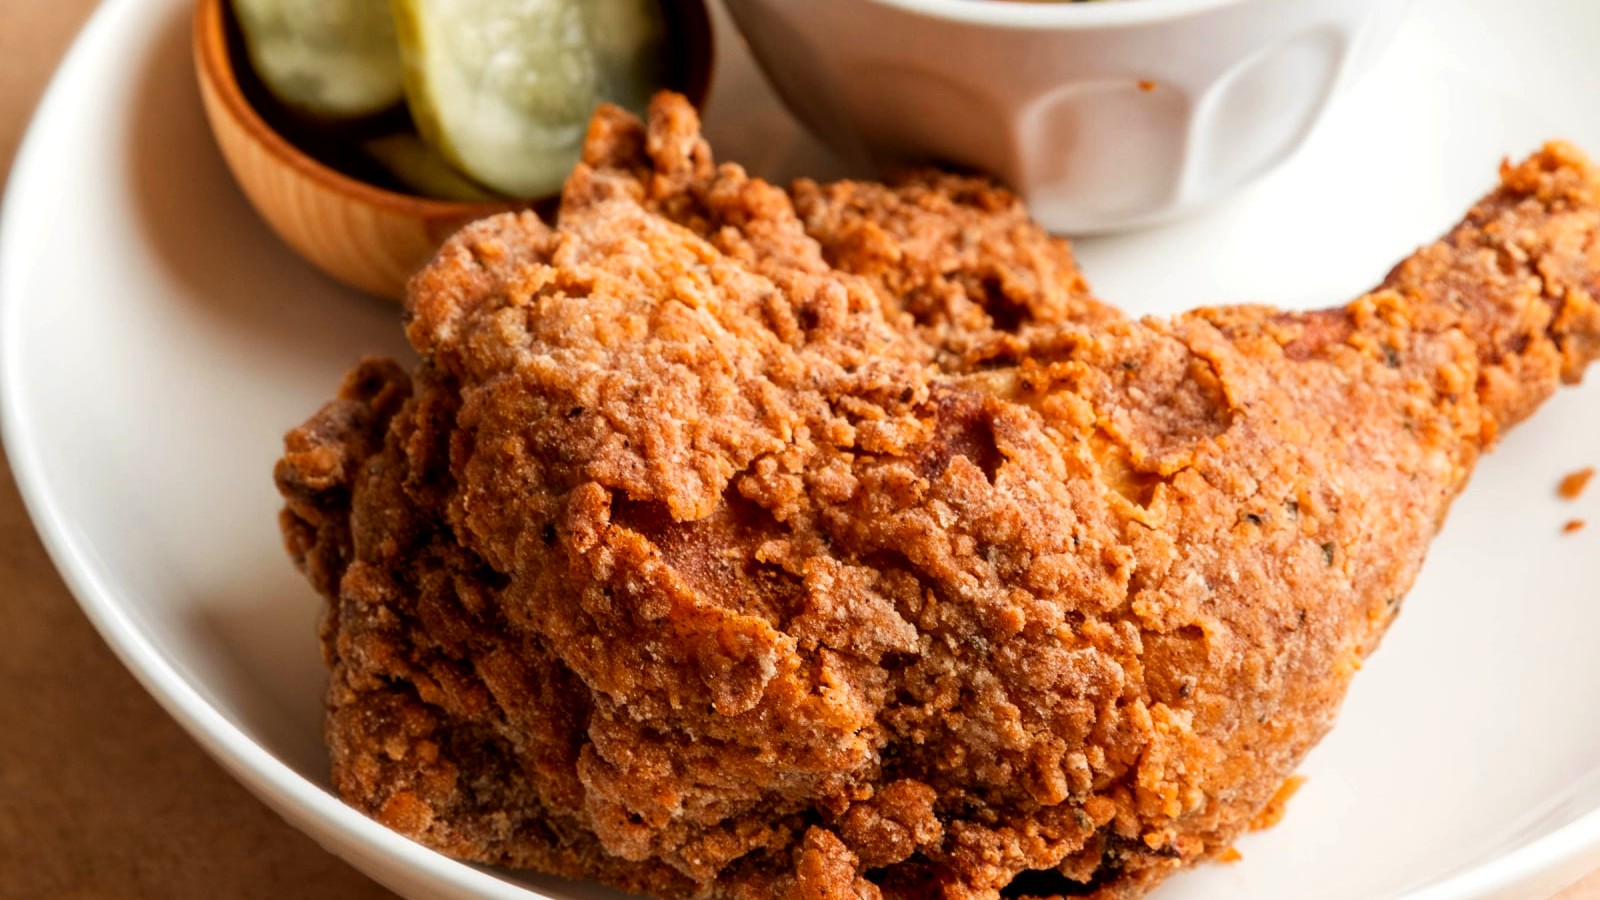 Image of Southern Sweet Tea Air Fried Chicken